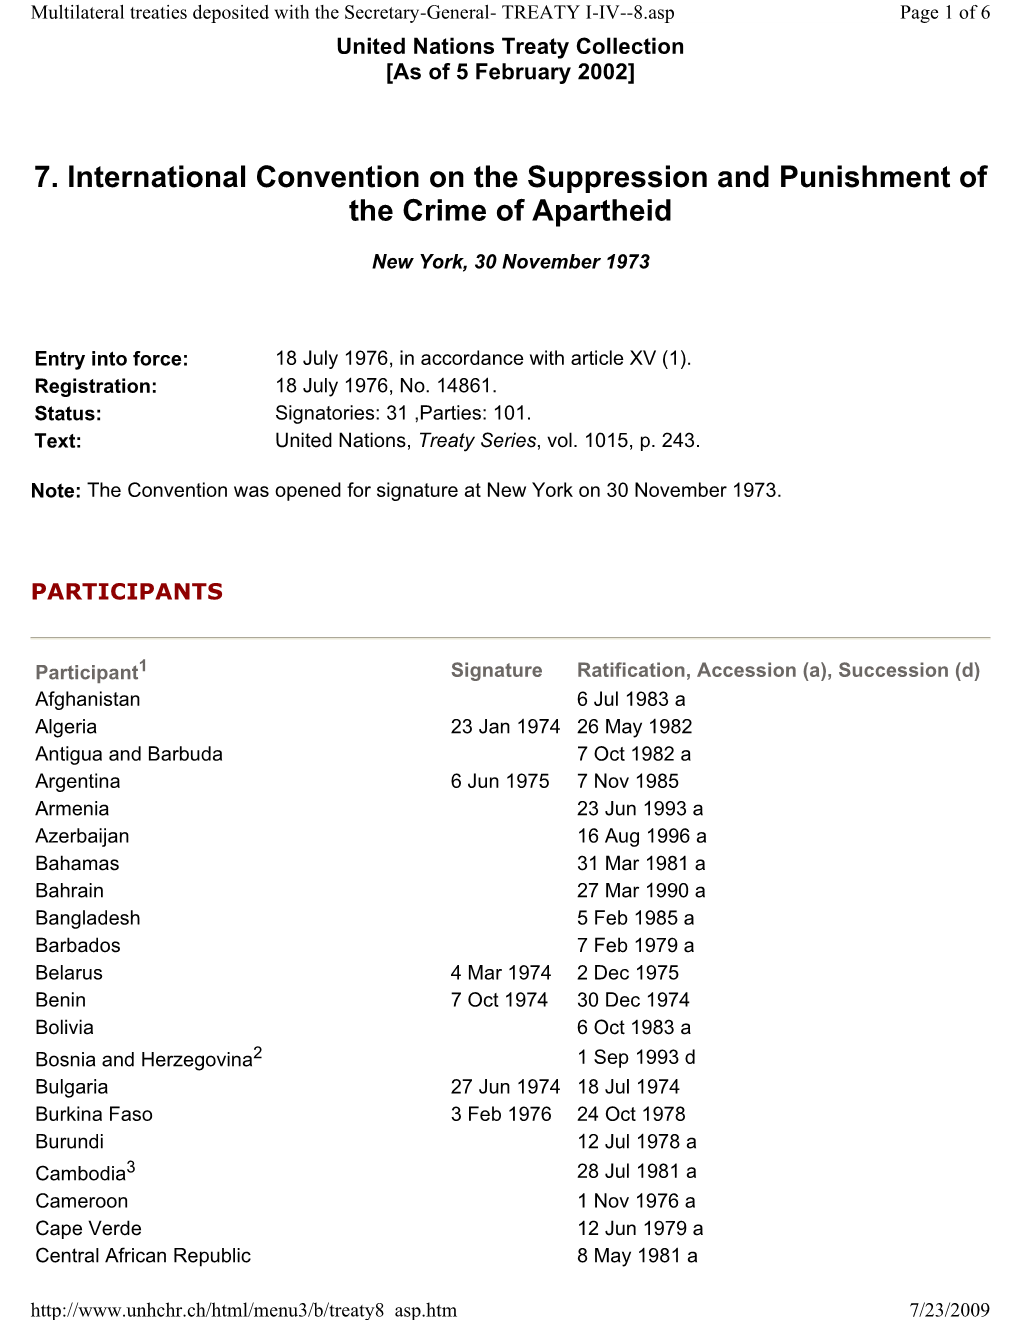 7. International Convention on the Suppression and Punishment of the Crime of Apartheid